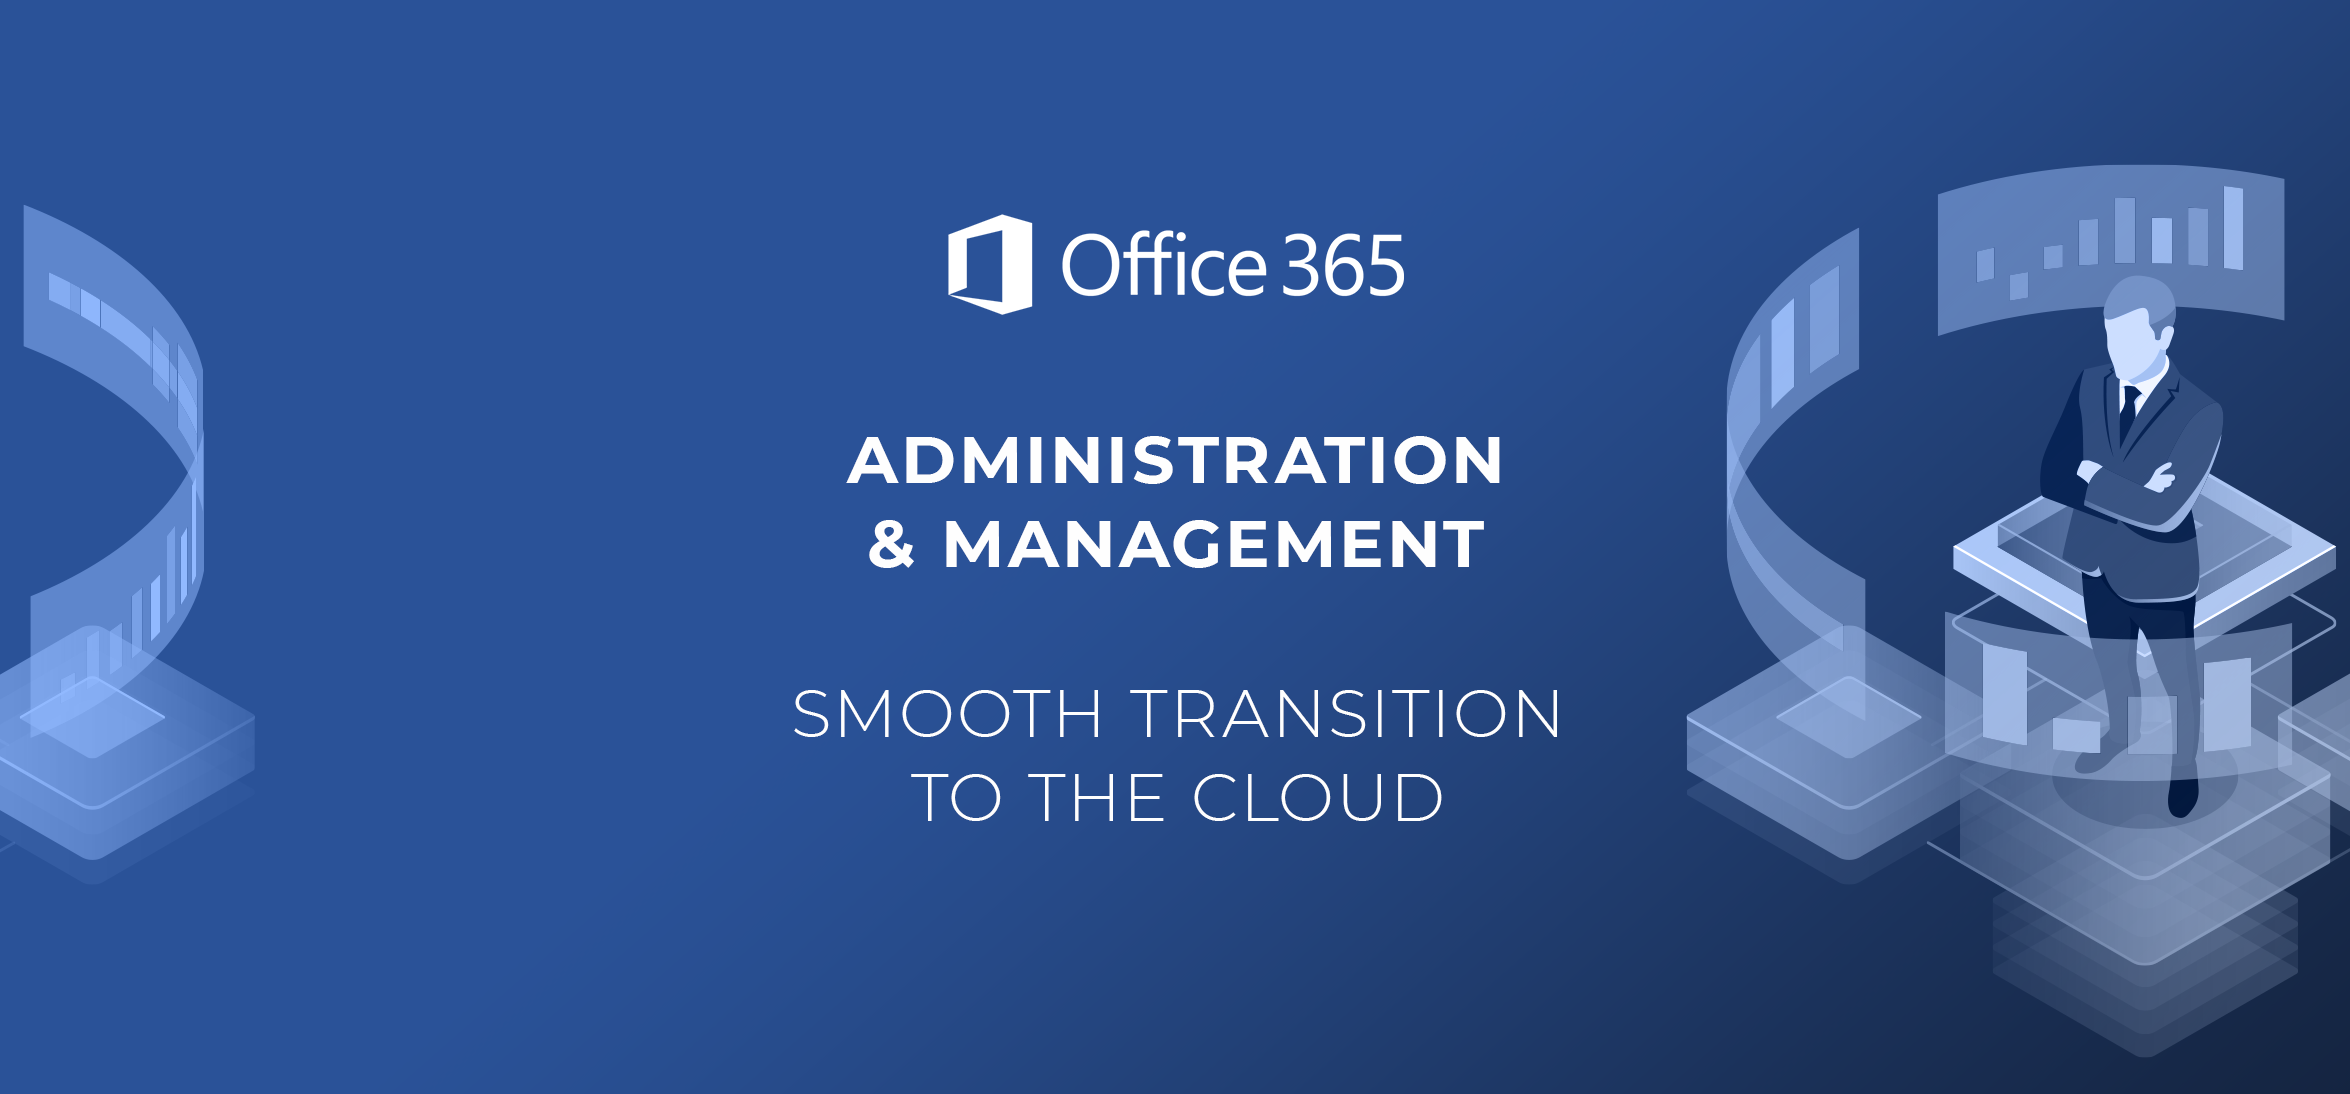 Microsoft Office 365 Administration Services in Fallbrook CA, 92028